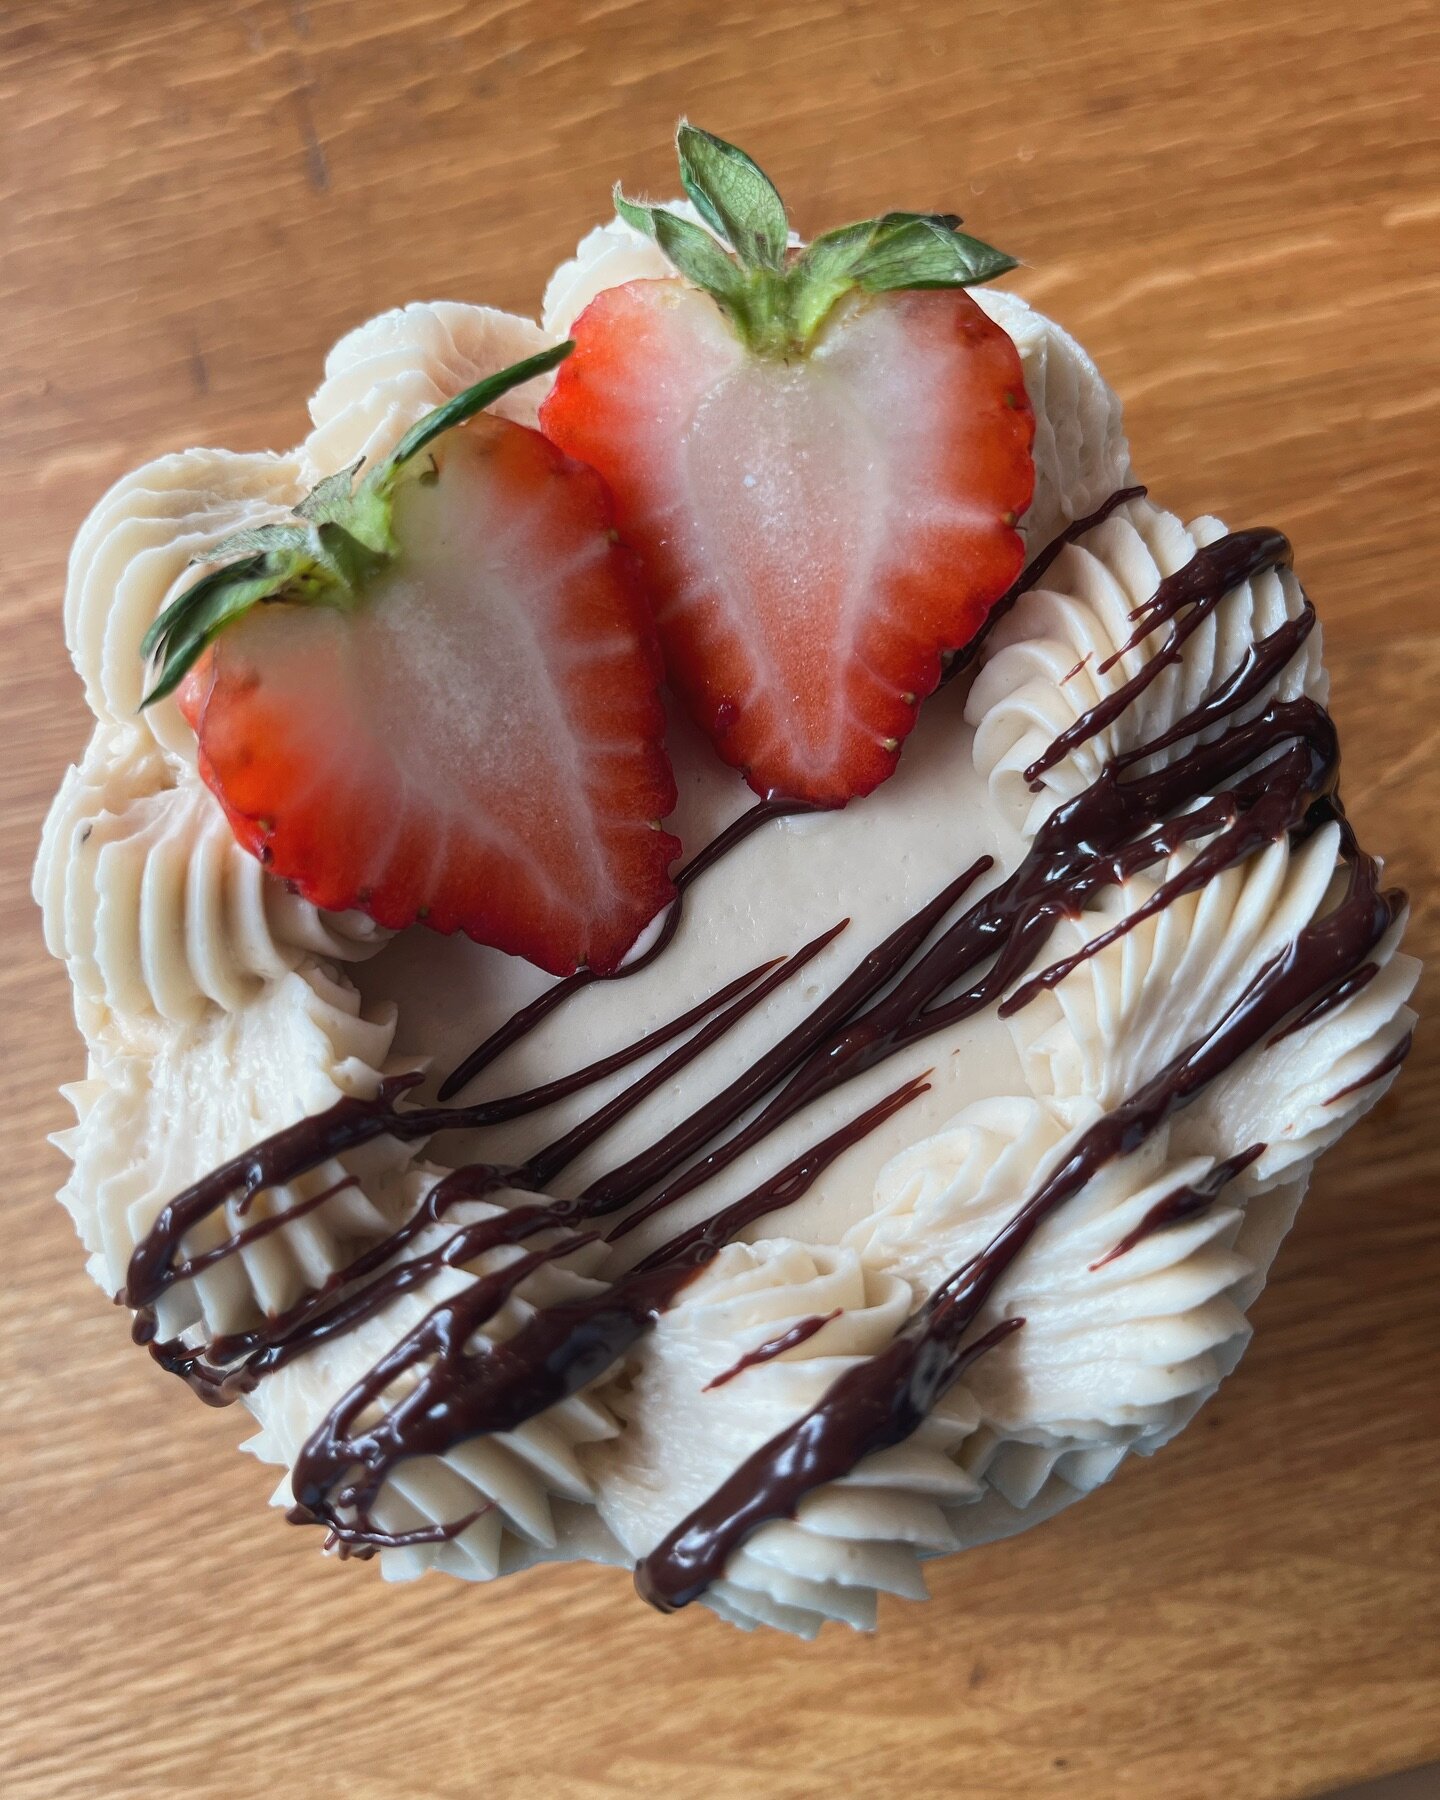 A baileys and cream cake with strawberry filling? Count us in! The chocolate ganache on top adds a perfect little detail too! 
.
.
.
.
.
#glutenfree #glutenfreebaking #glutenfreebakery #baileys #jmu